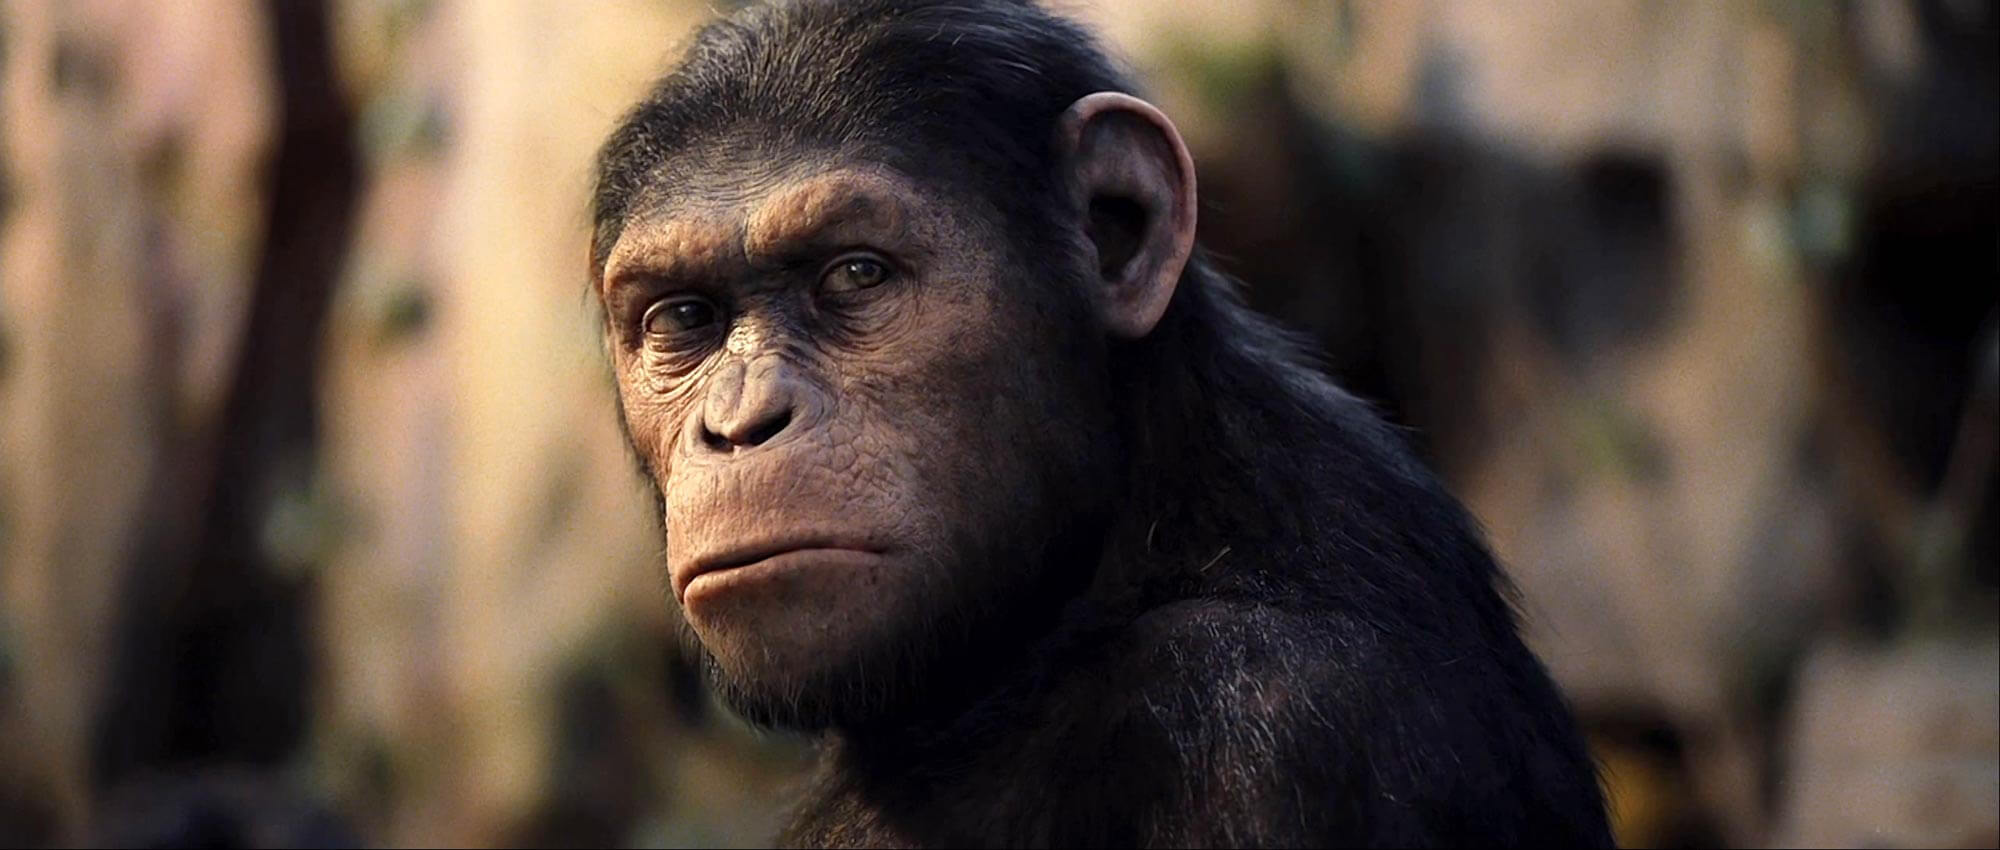 video review : Rise Of The Planet Of The Apes